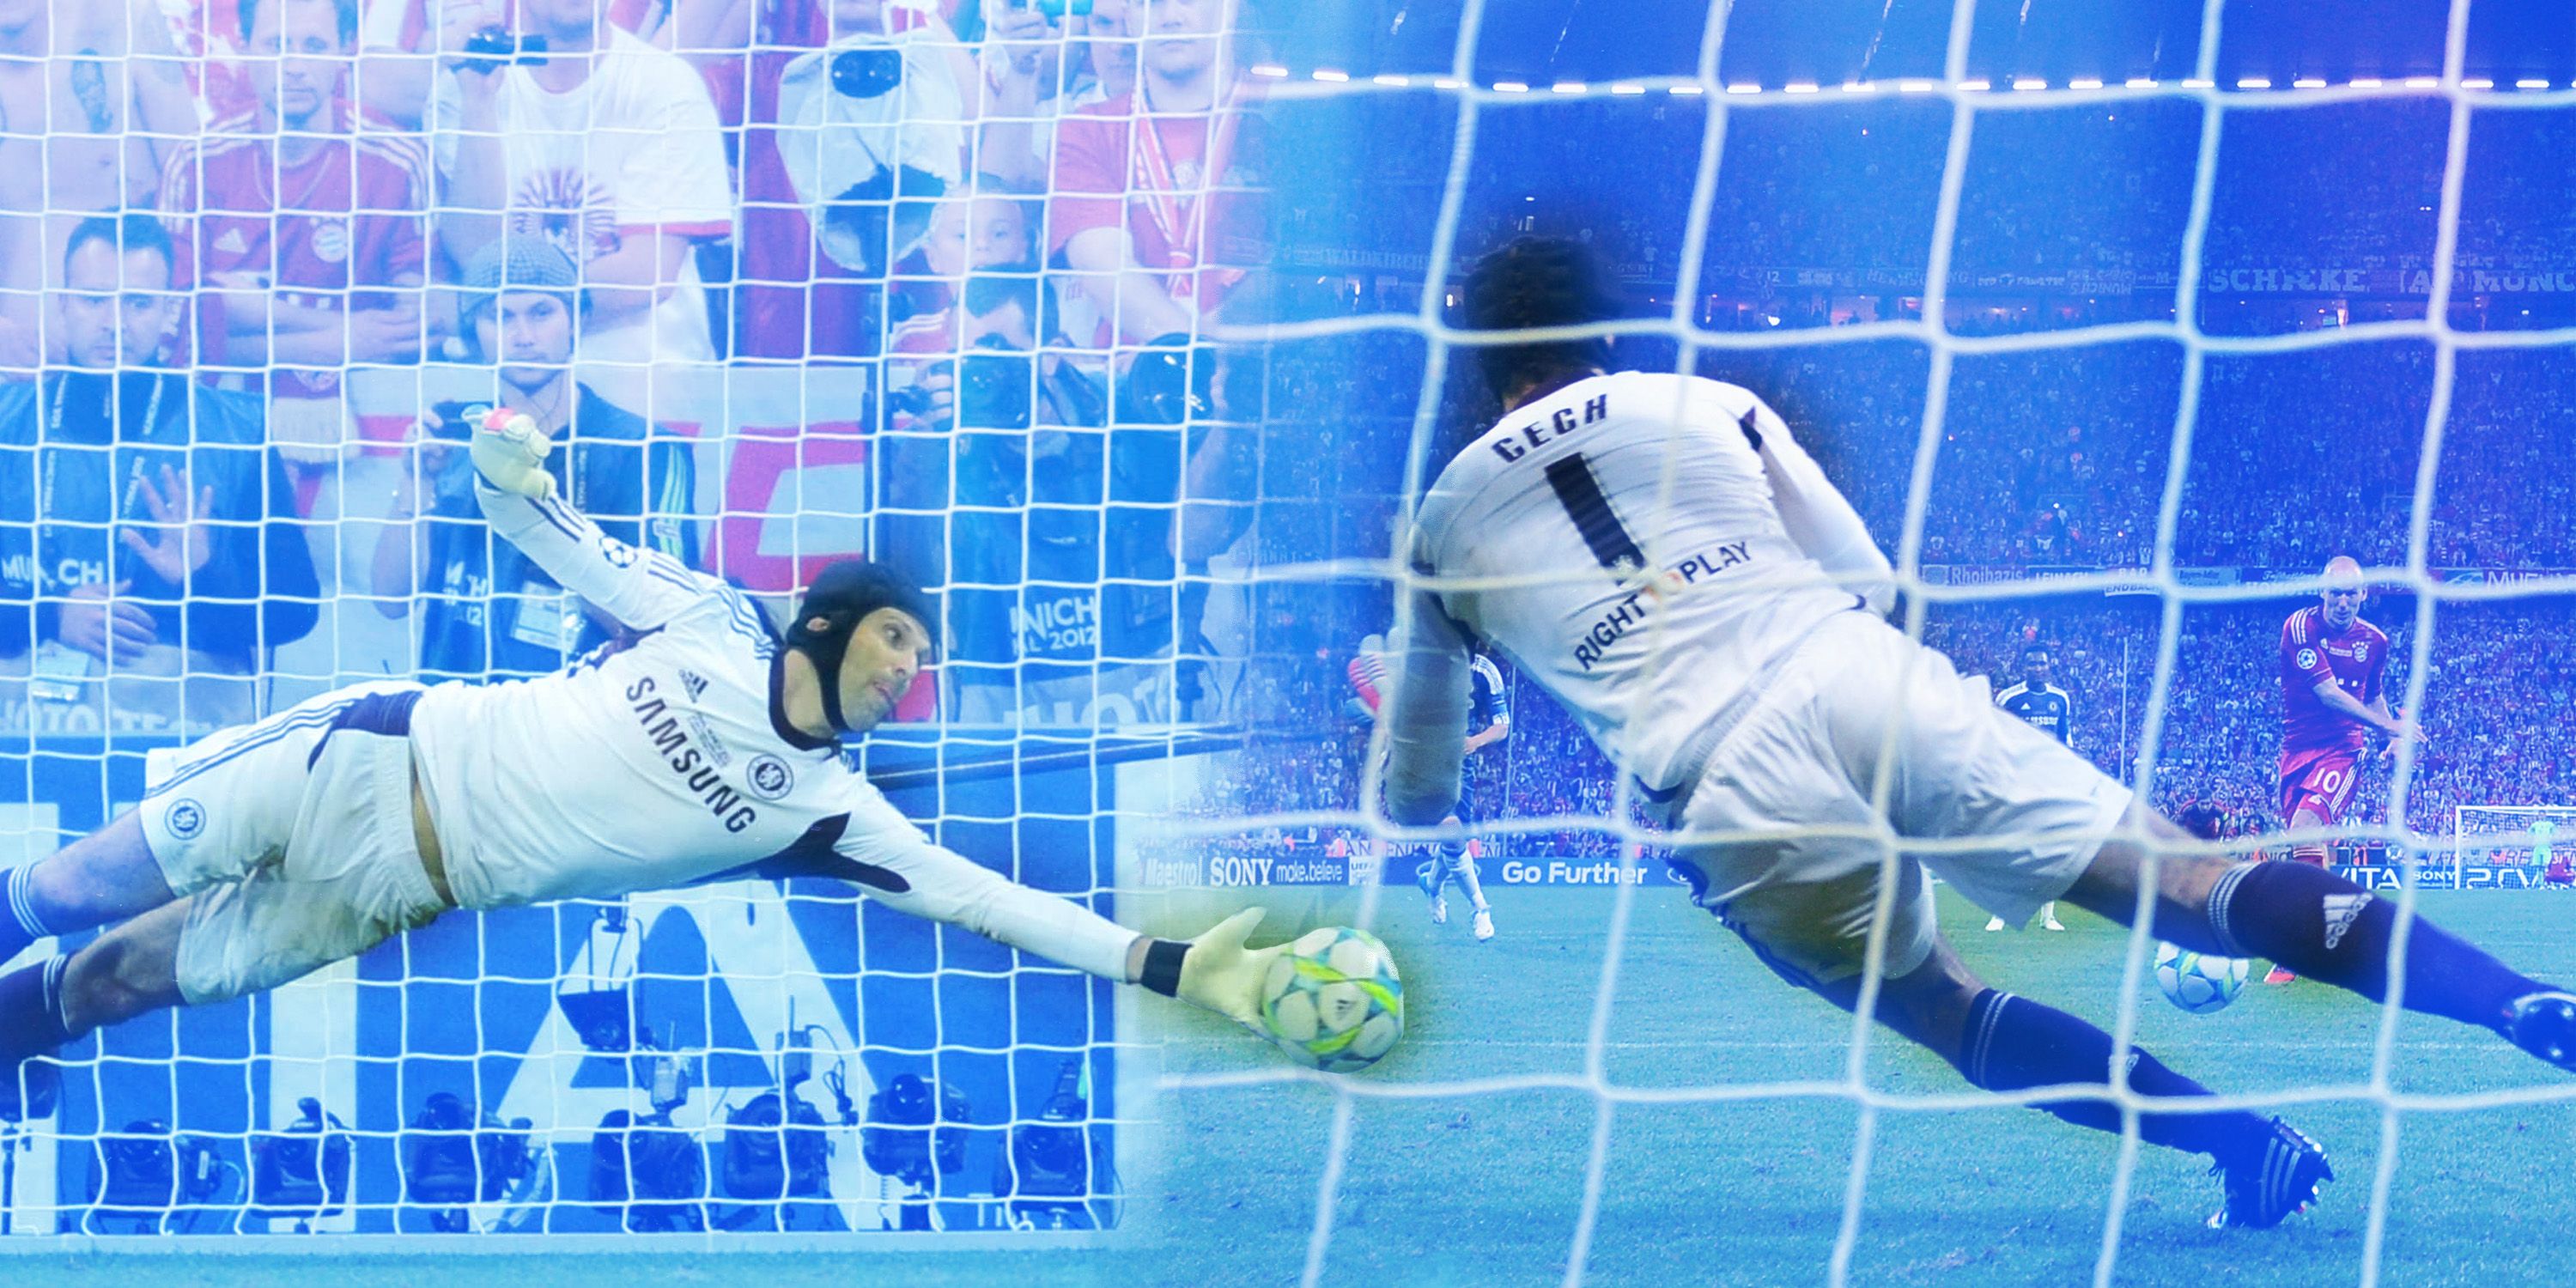 Petr Cech making penalty saves for Chelsea vs Bayern Munich in 2012 Champions League final